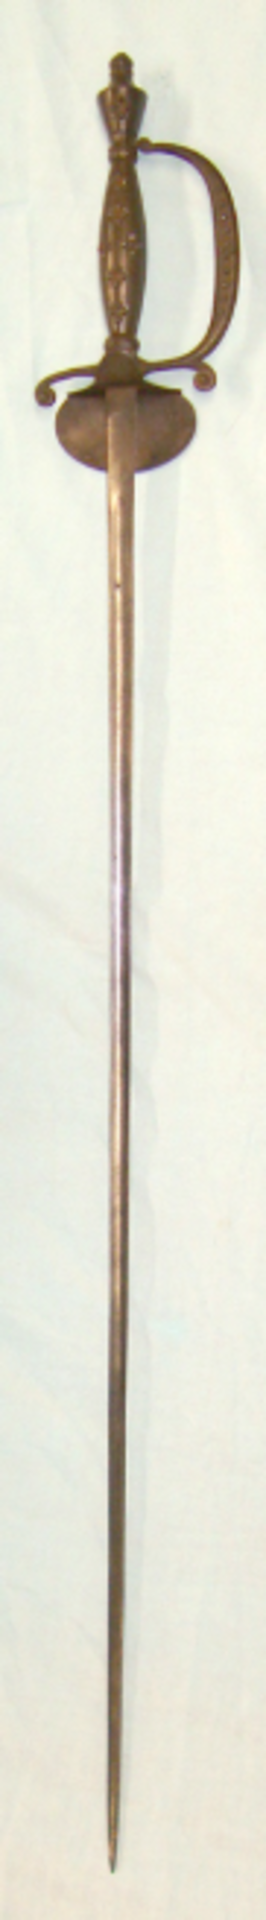 Victorian English Small Sword/ Mourning Sword. - Image 3 of 3